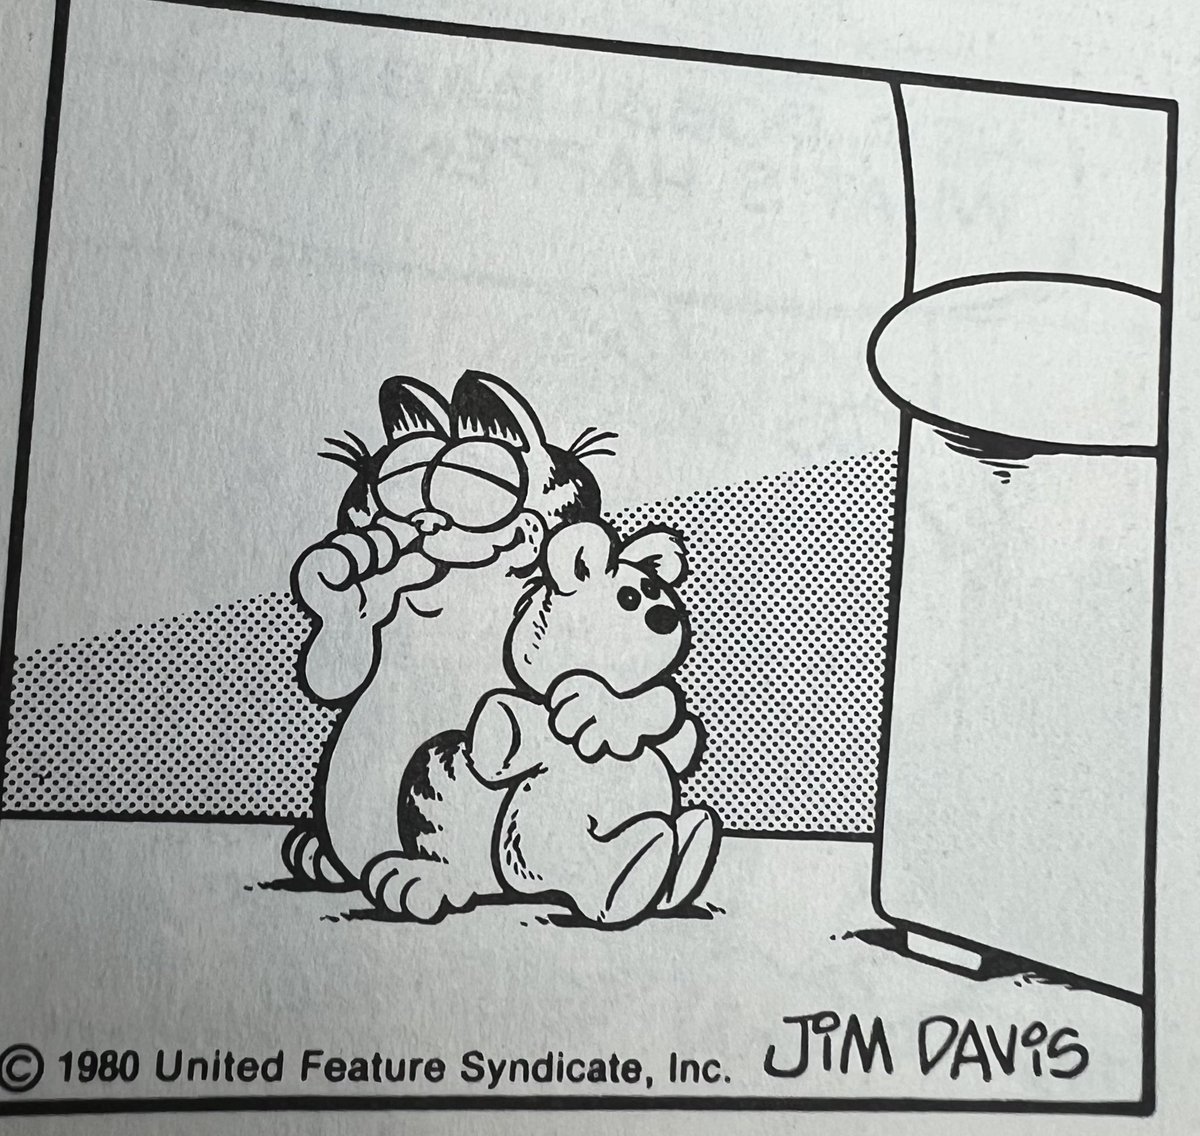 Garfield is so cute in the early comic strips